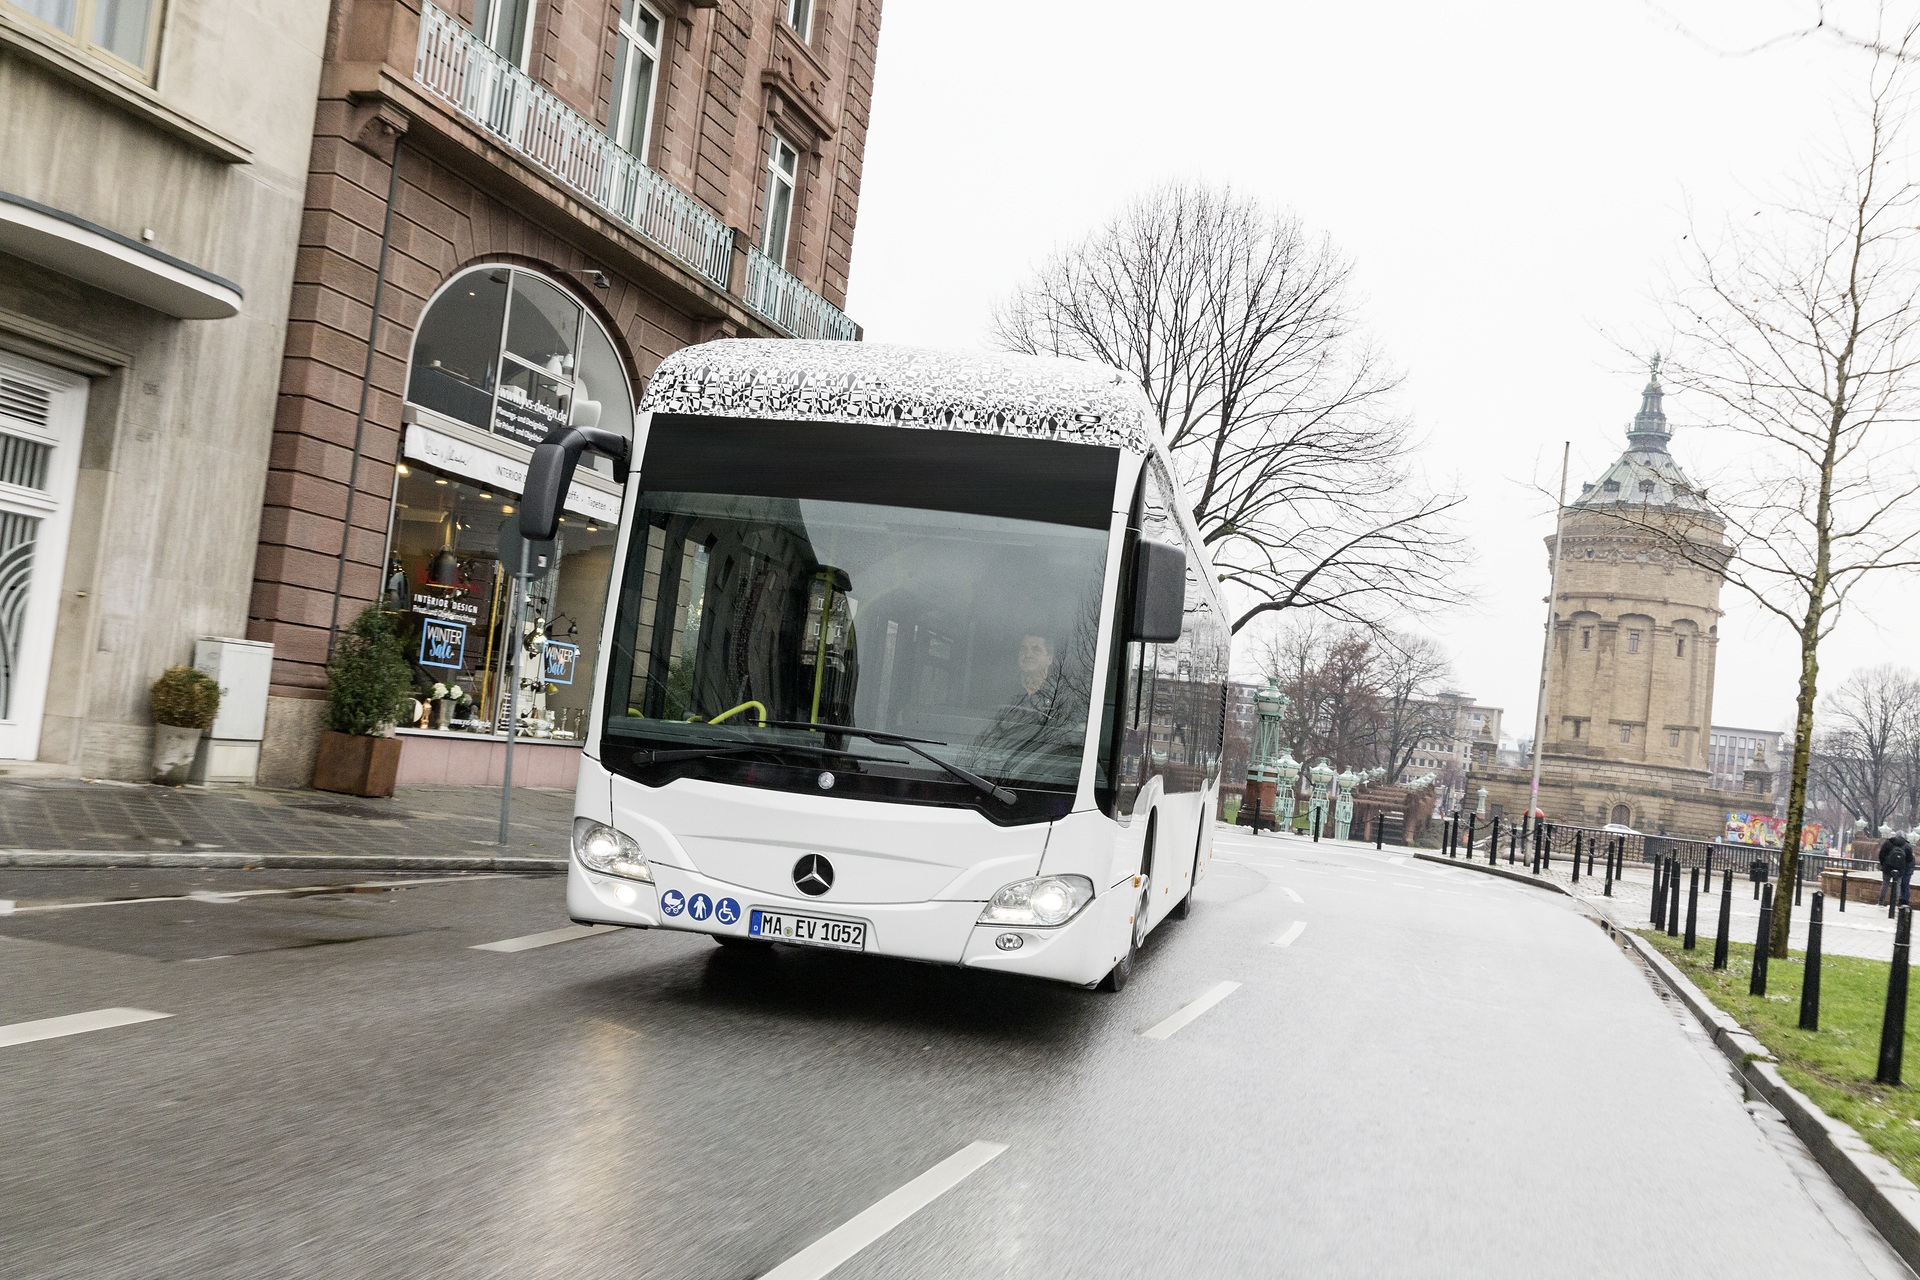 Mercedes-Benz Citaro: Stars are shining over Berlin: Berliner Verkehrsbetriebe (BVG), the Berlin transport authority, is entering the electric era with the new, fully electrically powered Mercedes-Benz Citaro